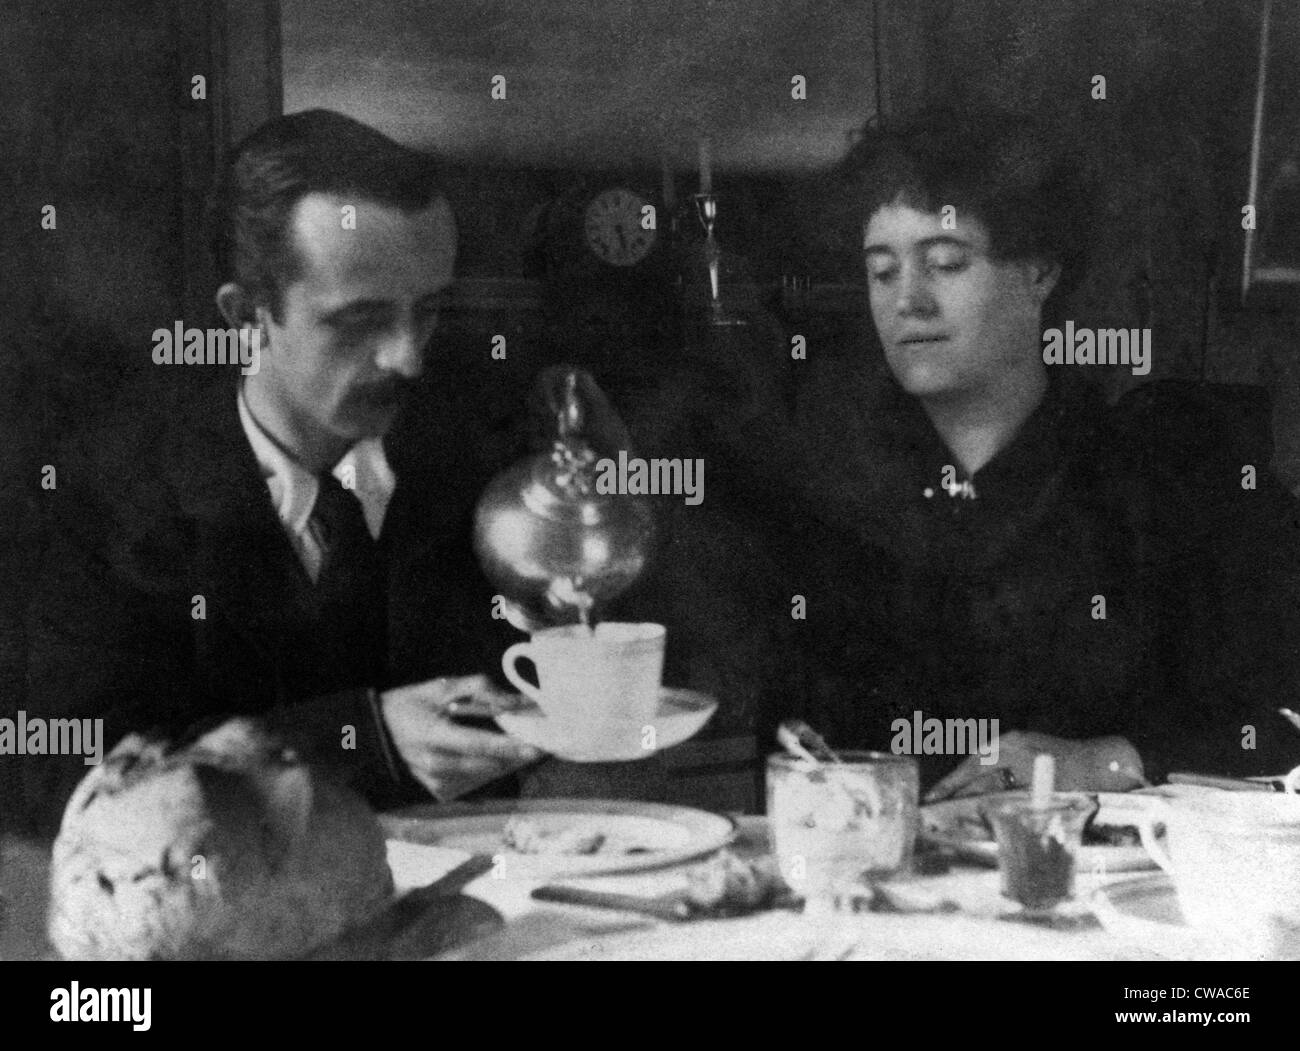 Barrie, J. M. (James Matthew), (1860-1937) having tea with a women friend. Published in 'Allahakbarries,' a book Barrie printed Stock Photo